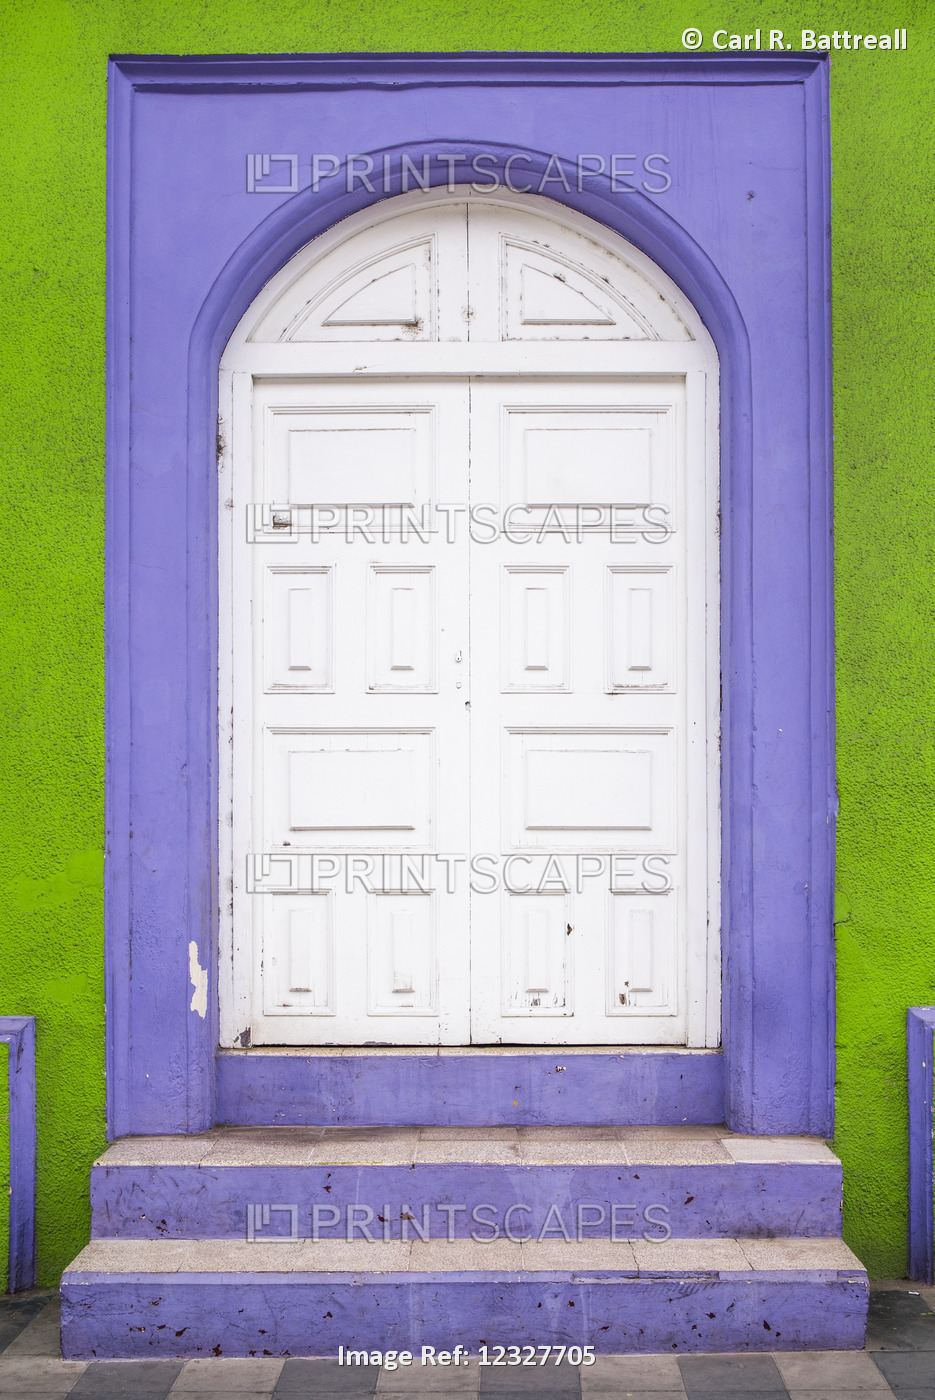 White Arched Double Doors With Purple Trim And A Bright Green Wall; Grenada, ...